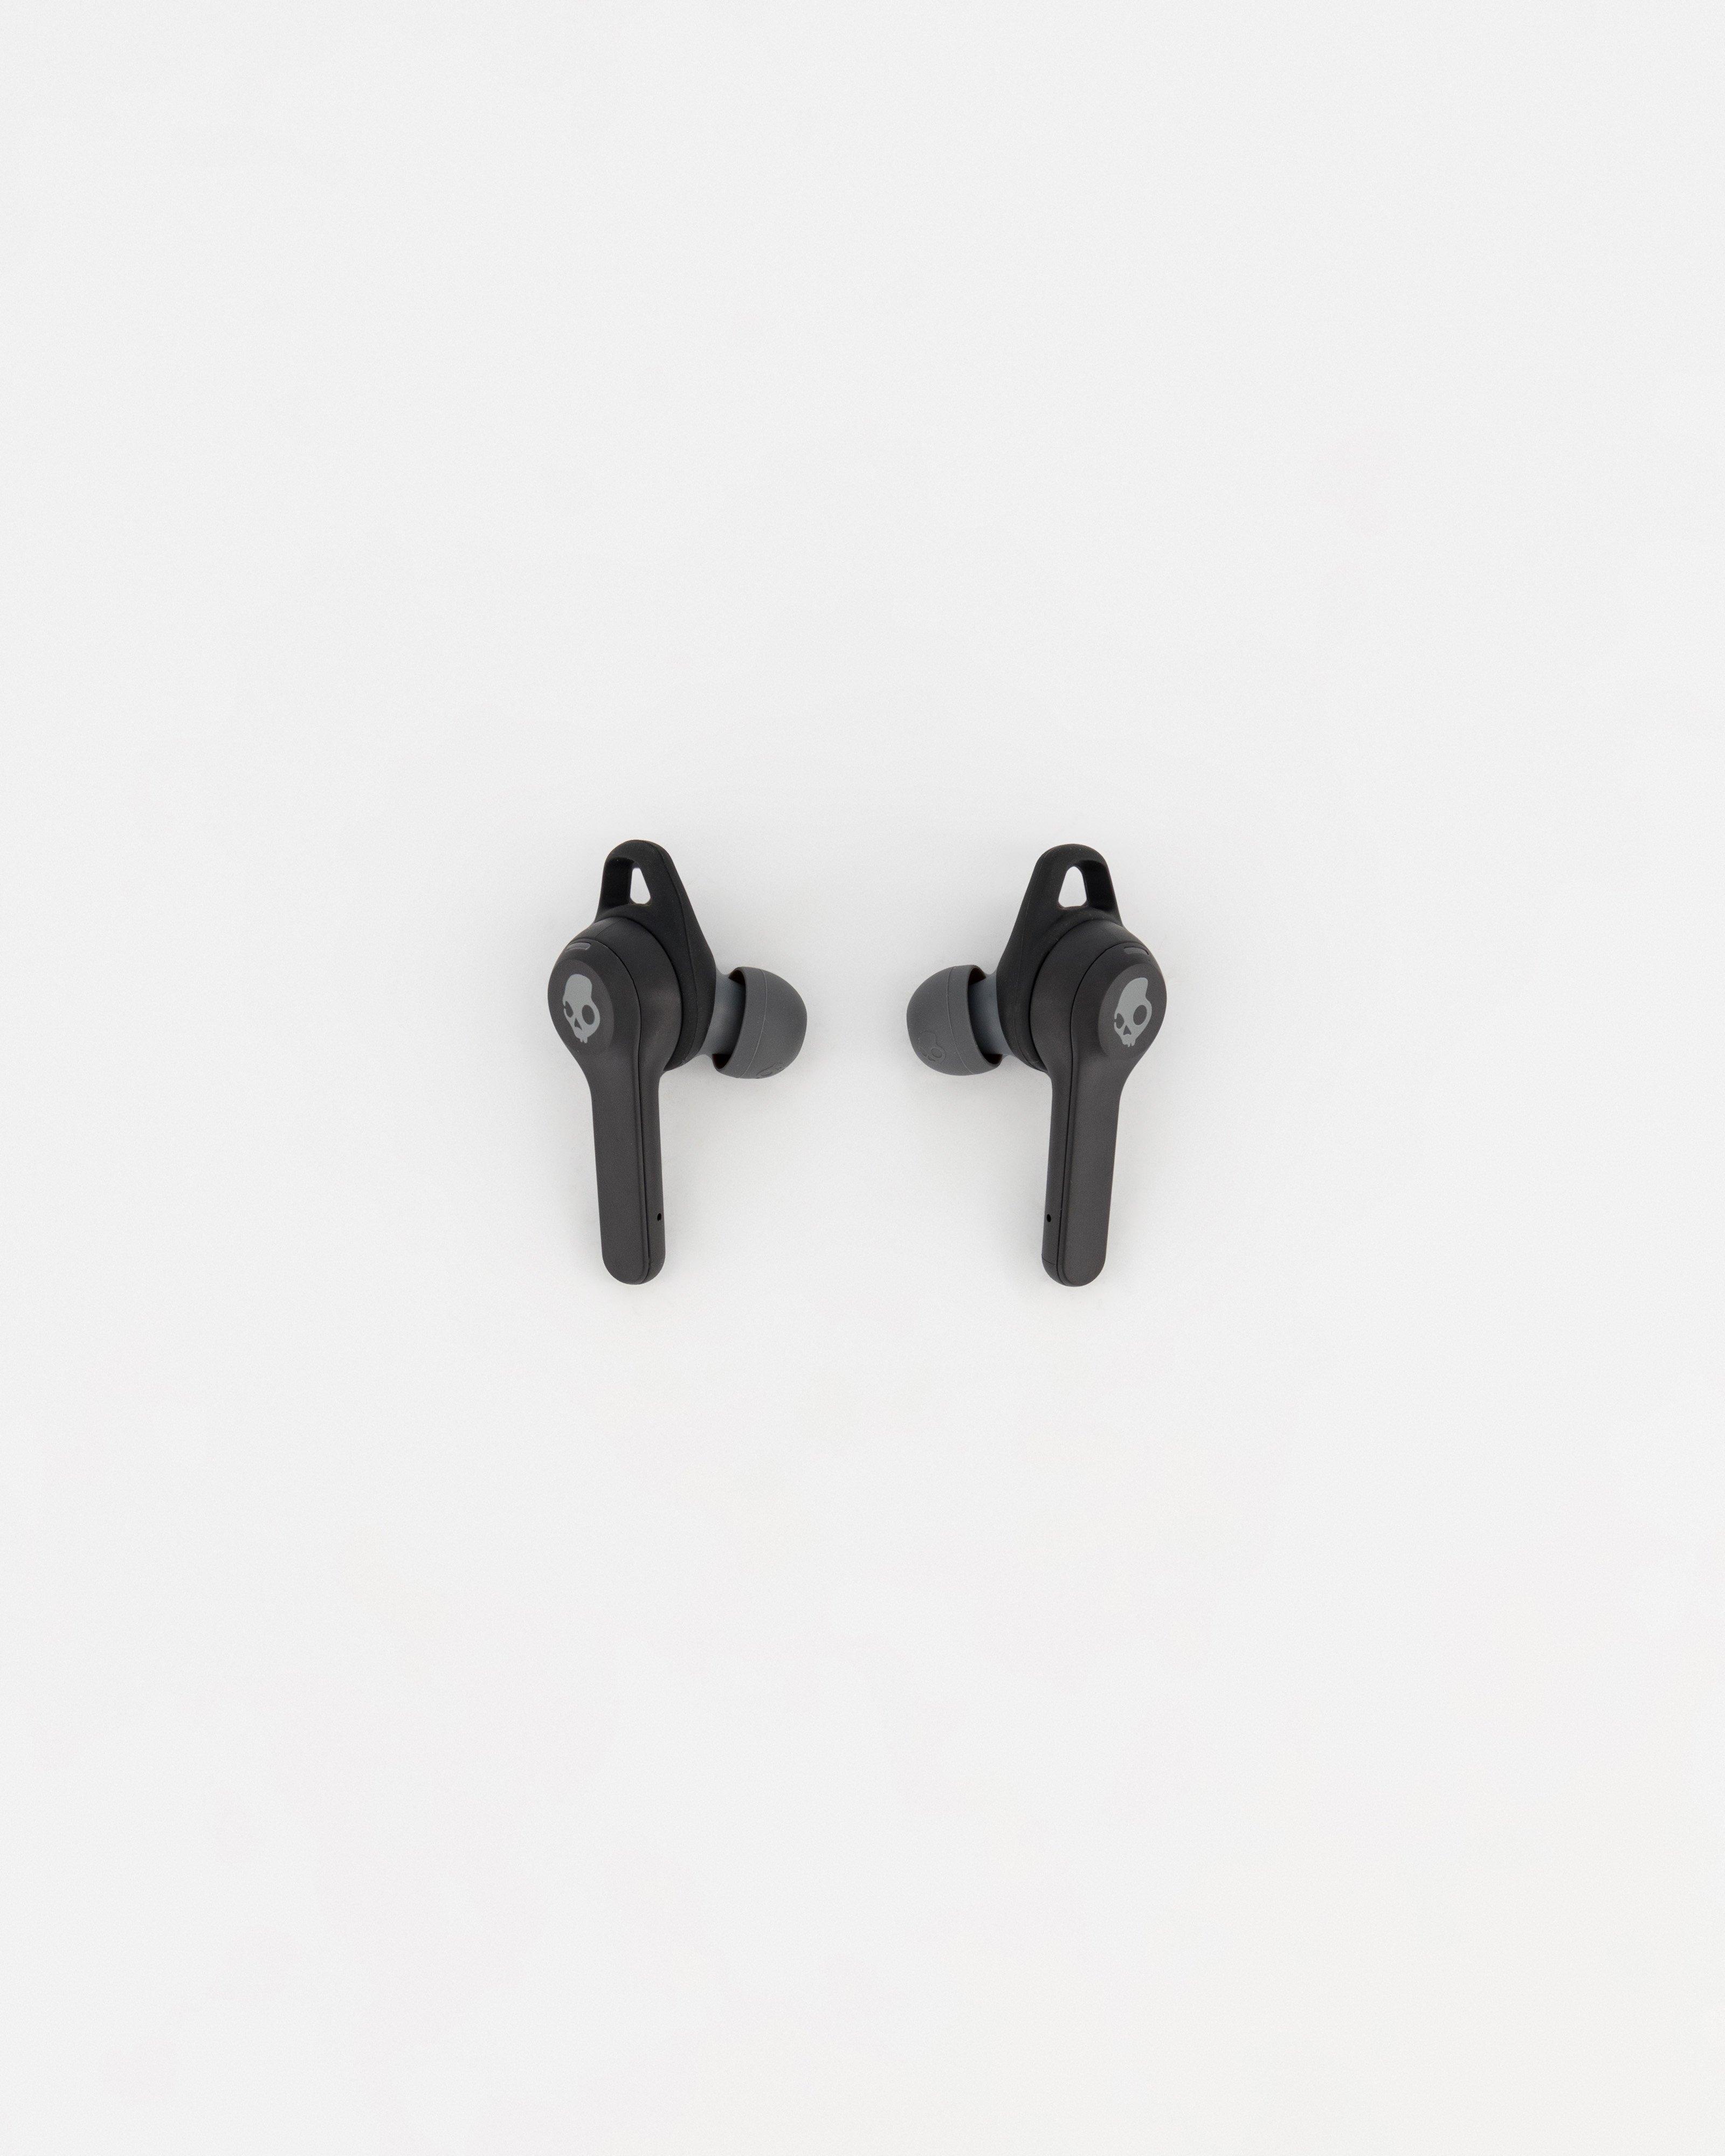 Skullcandy Indy Evo Wireless Earbuds -  No Colour